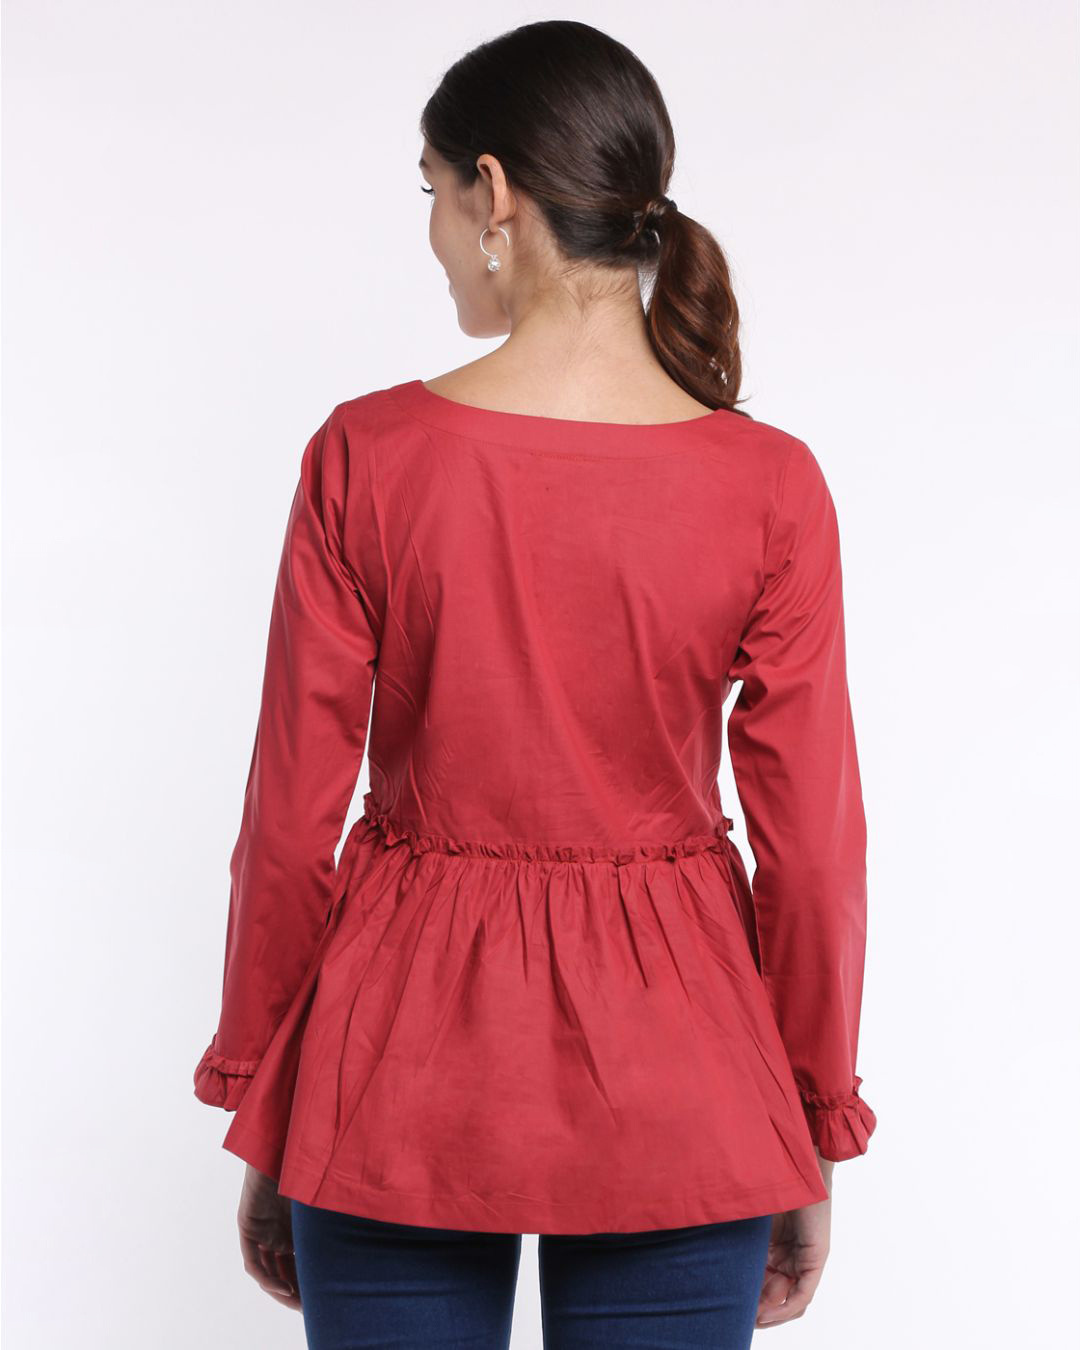 Shop Women's Red Square Neck Peplum Top-Back